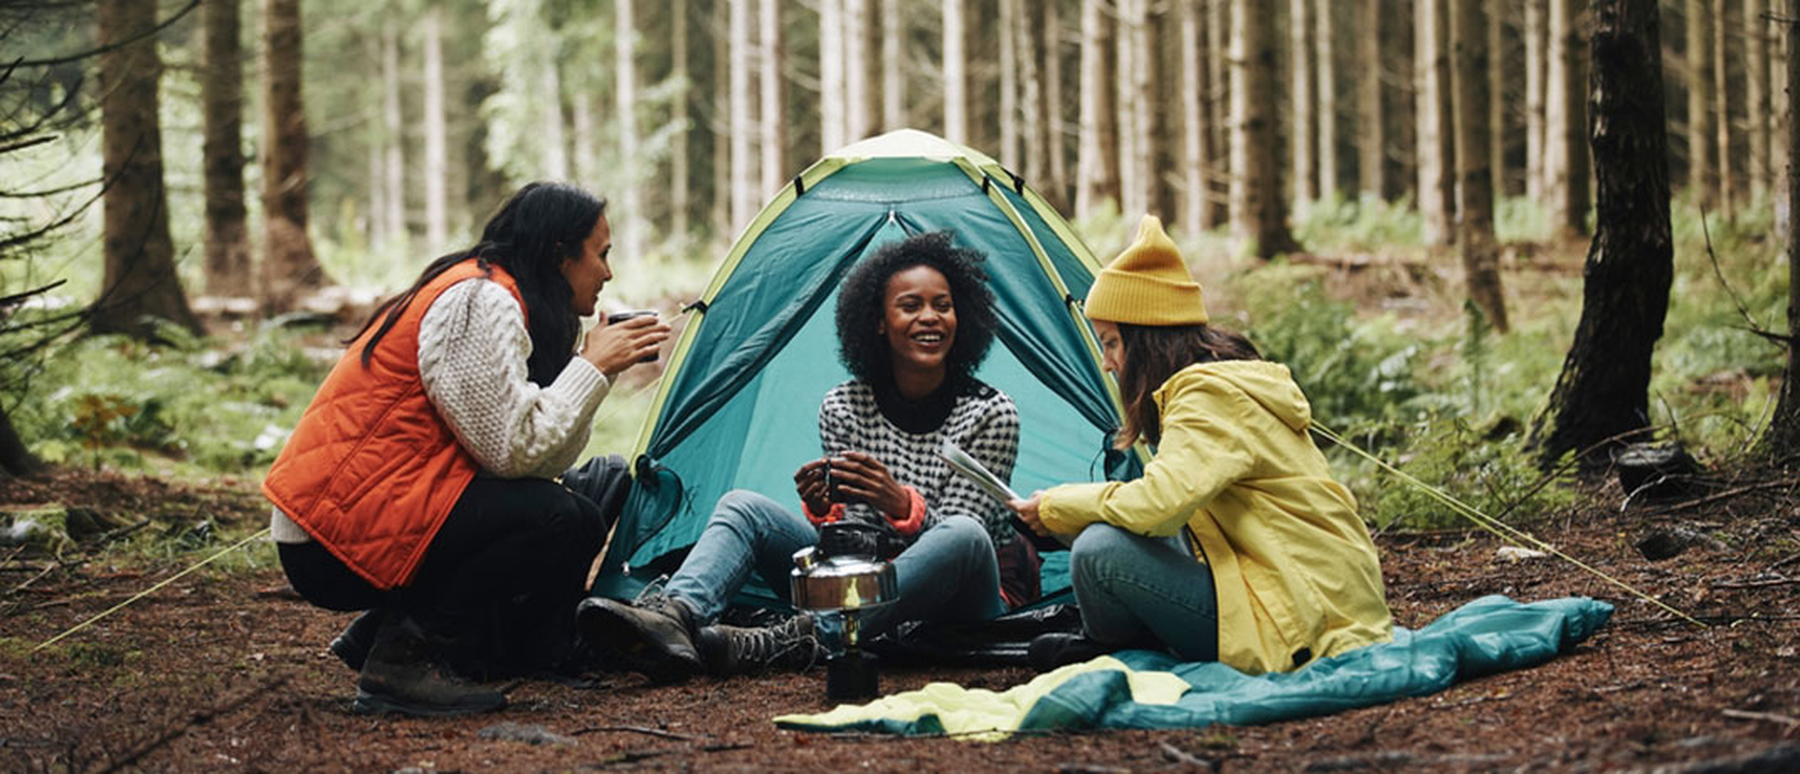 Three smiling young women camping by a tent